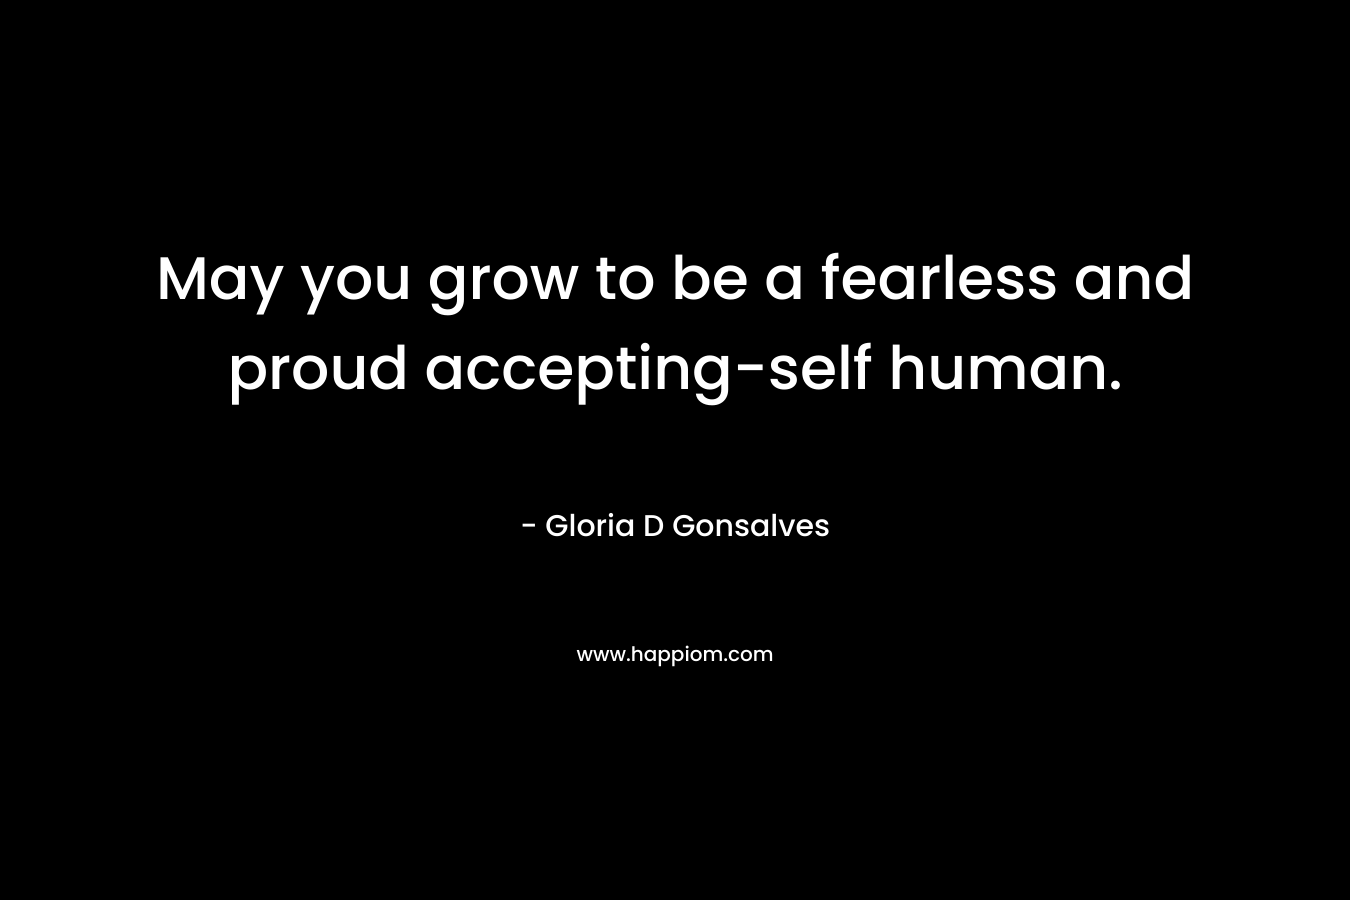 May you grow to be a fearless and proud accepting-self human. – Gloria D Gonsalves